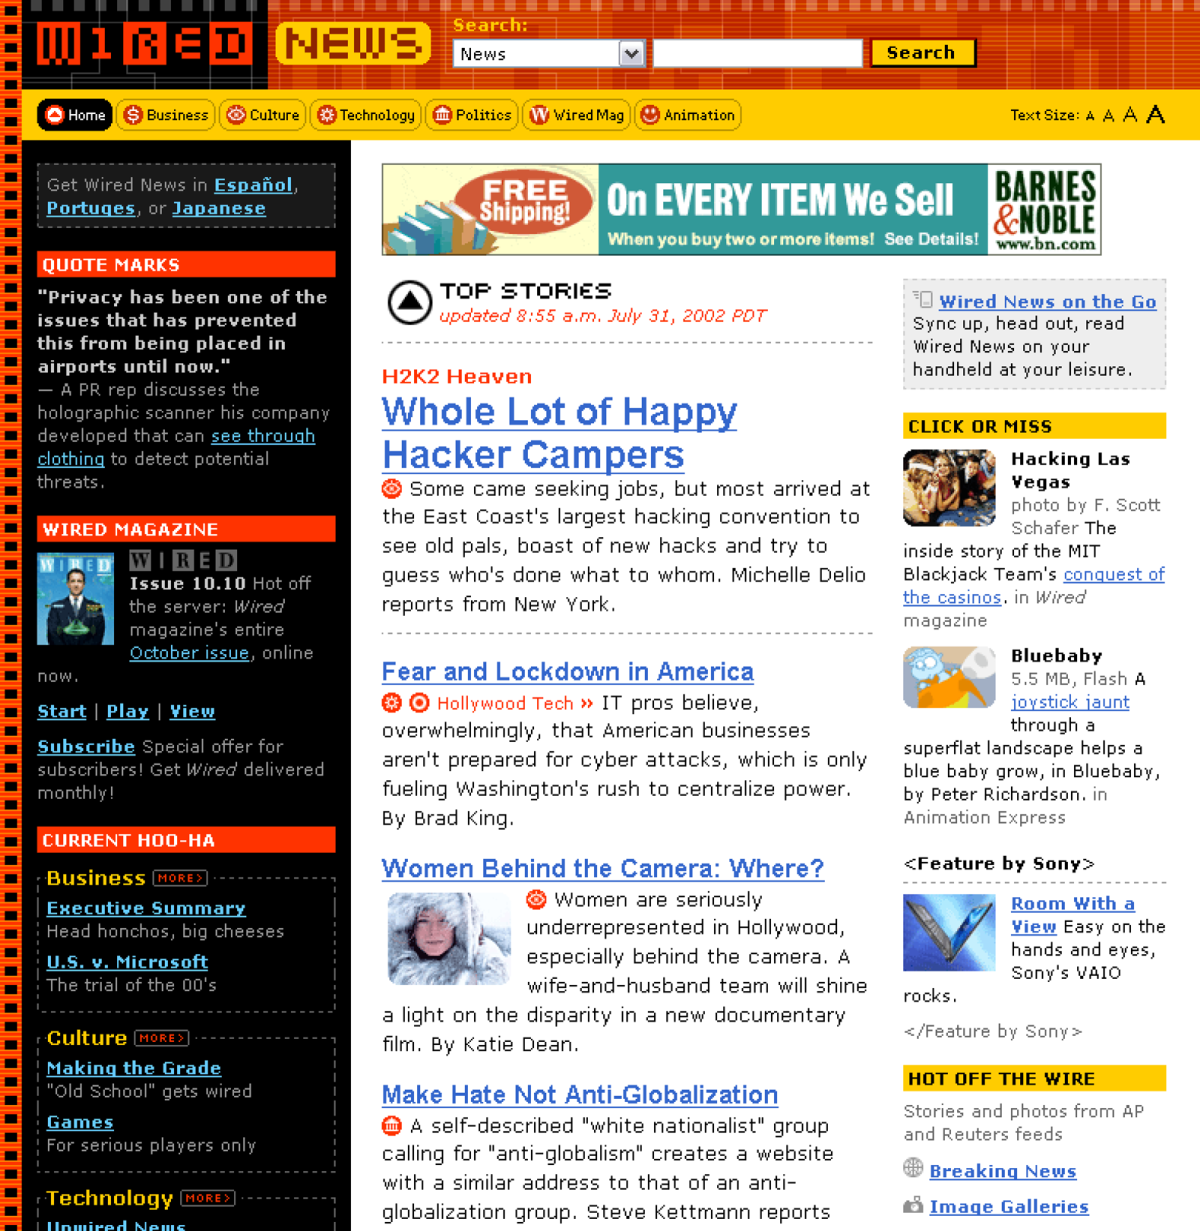 Wired News: Home page